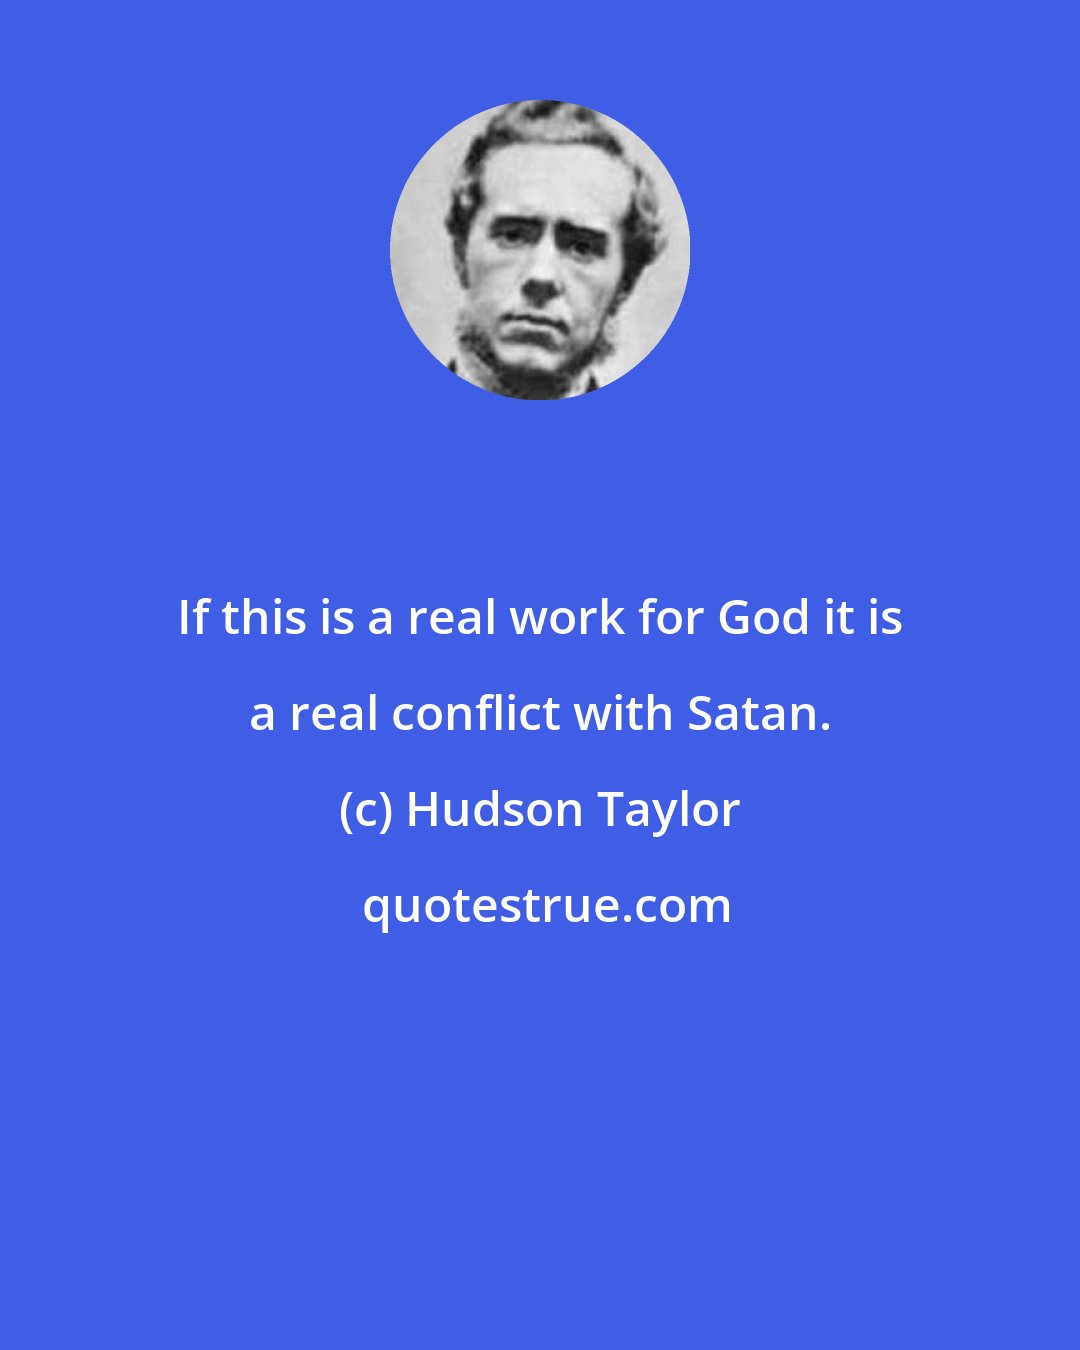 Hudson Taylor: If this is a real work for God it is a real conflict with Satan.